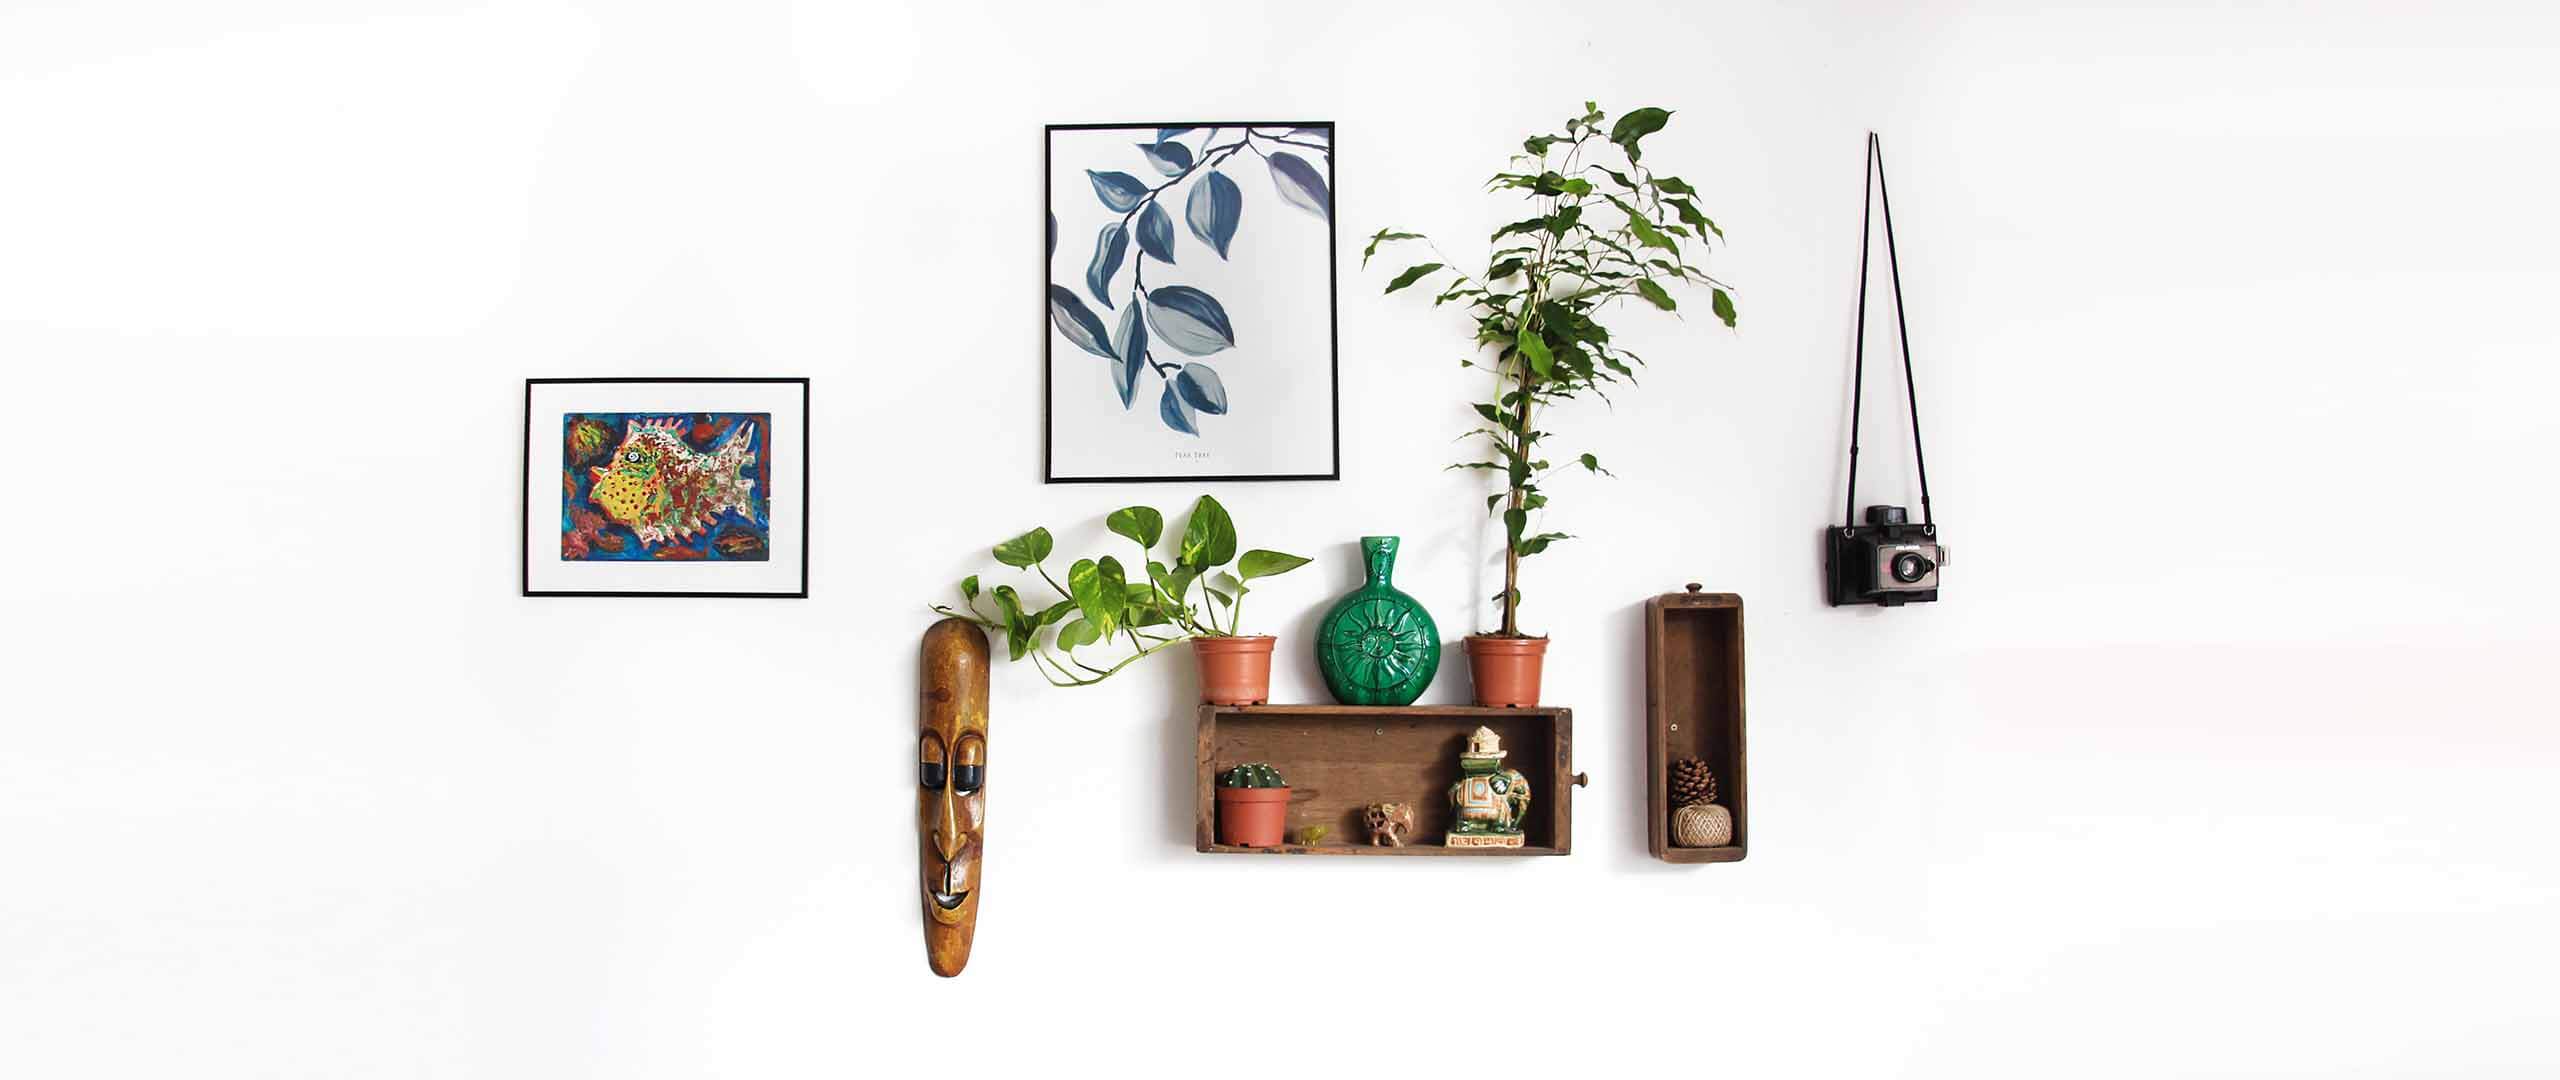 Learn How To Arrange Wall Art with 5 Easy Tips